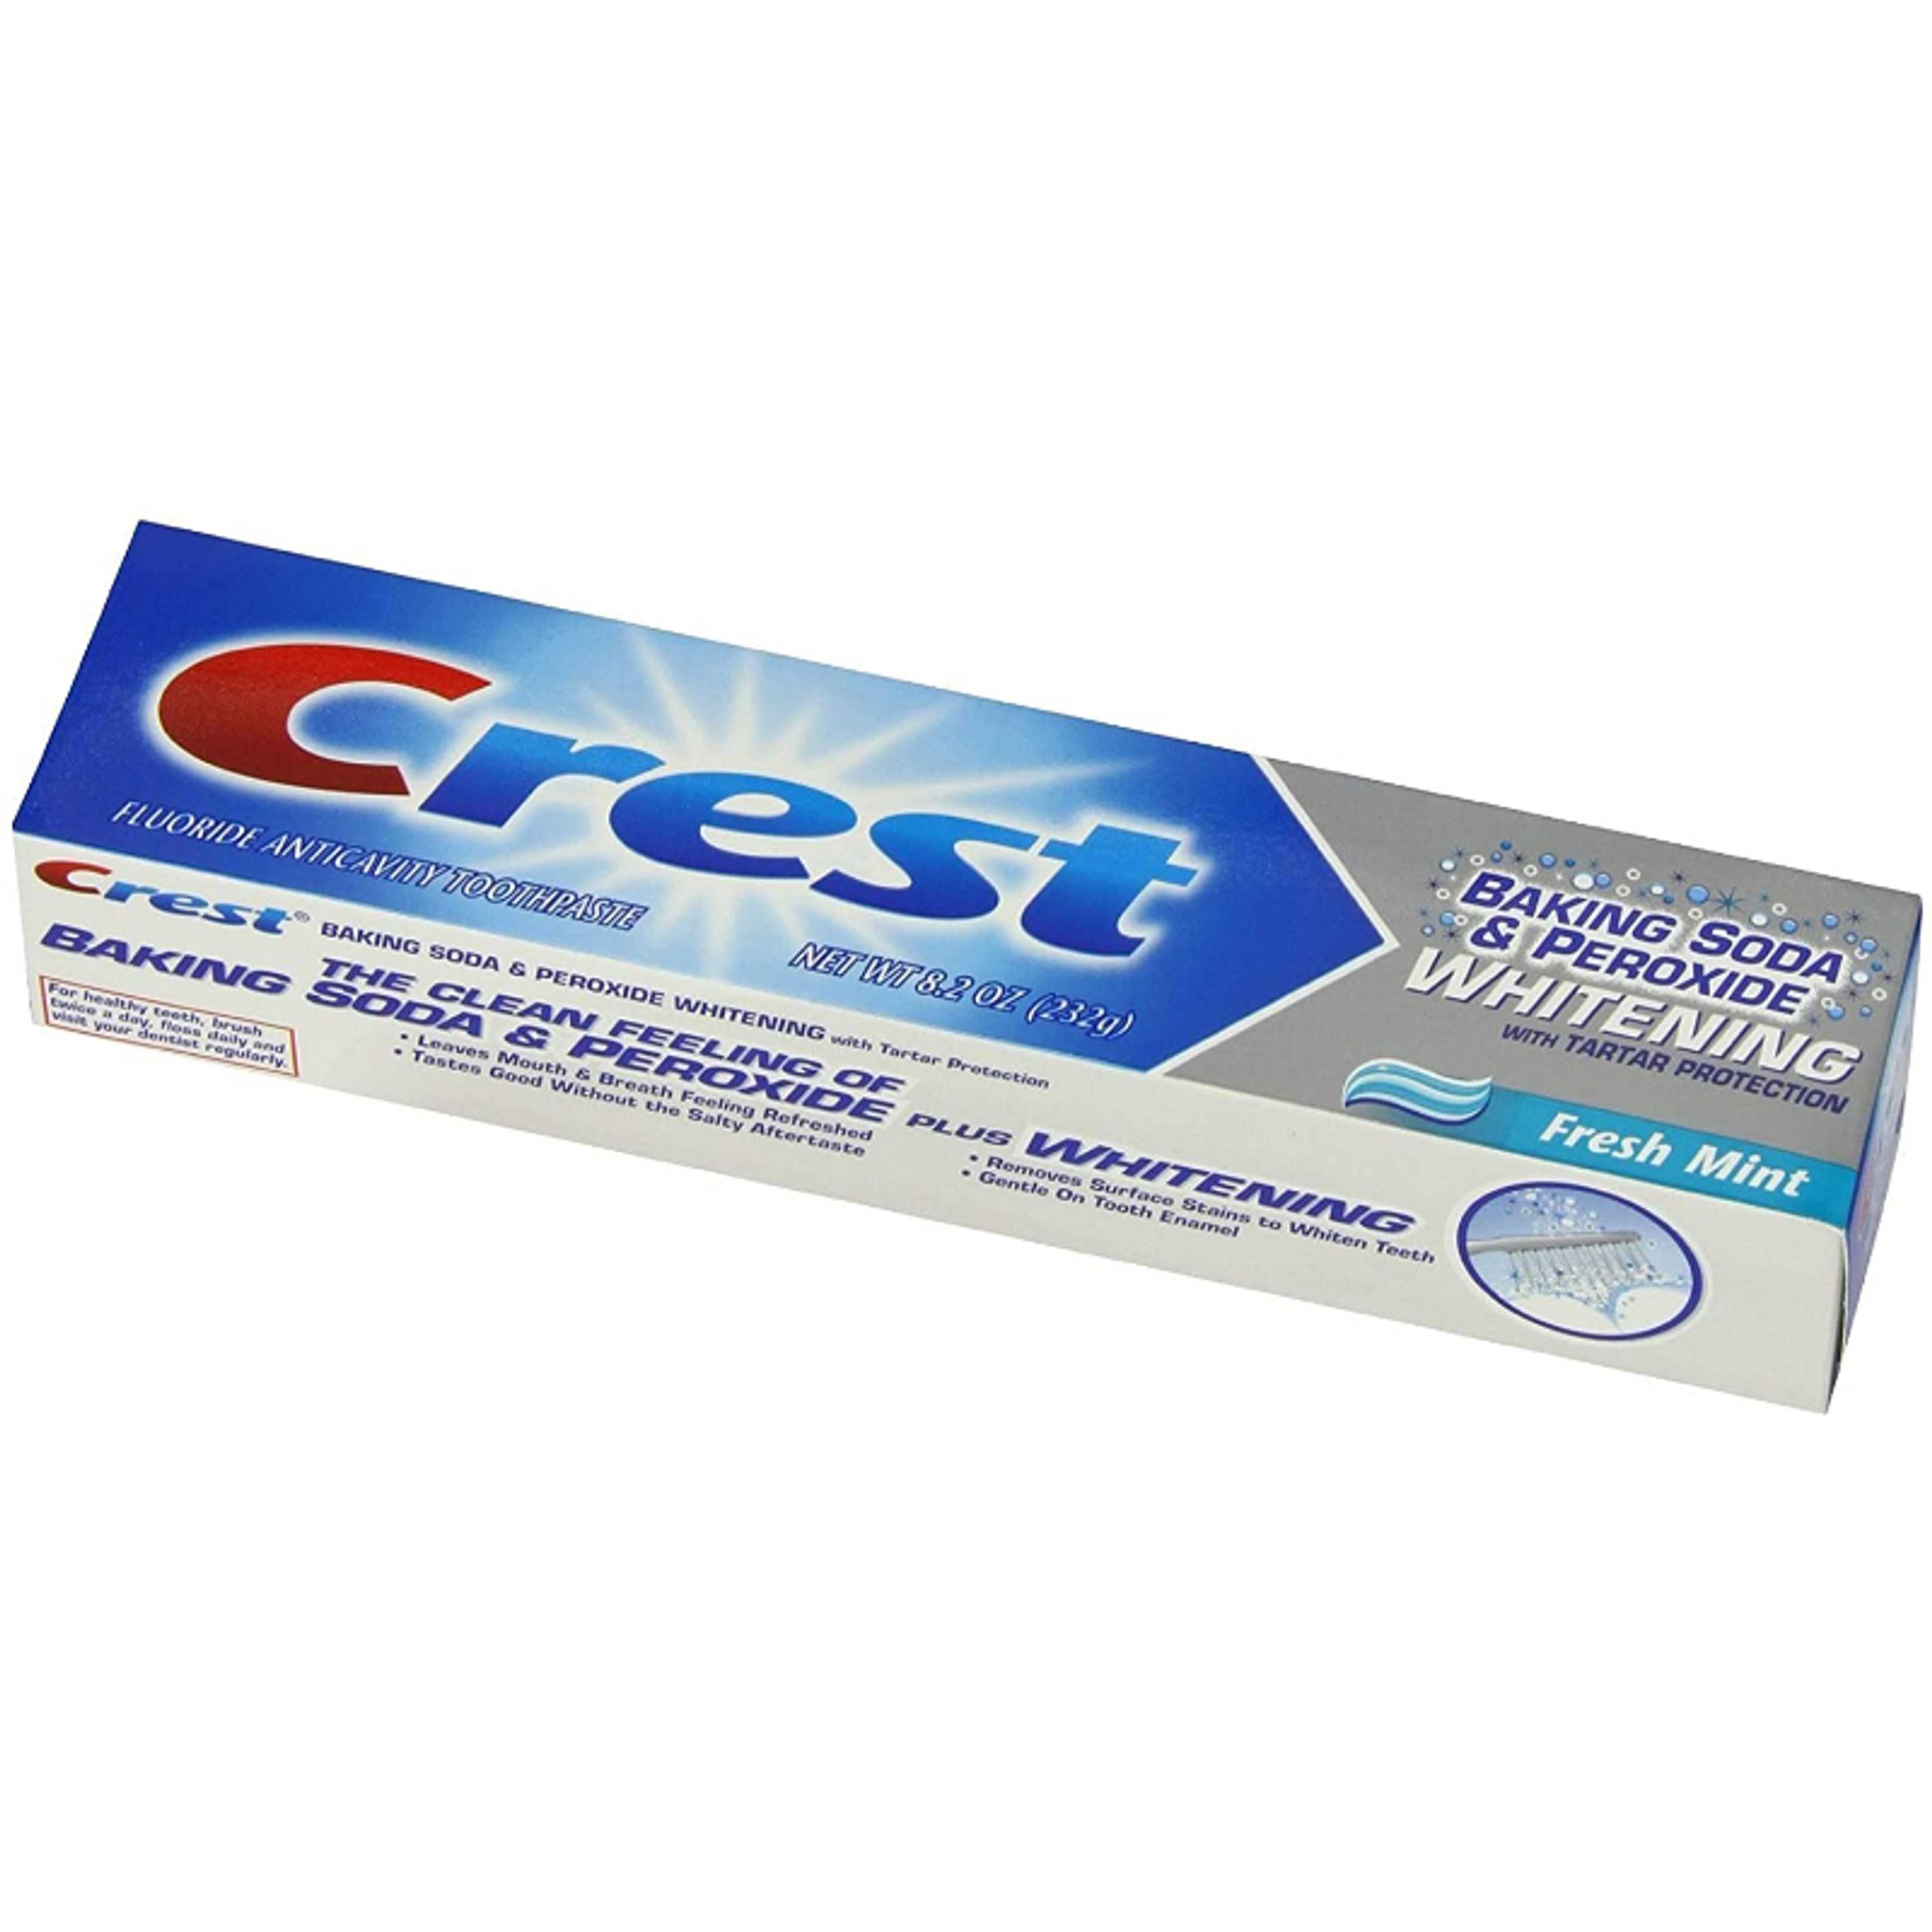 CREST TOOTH PASTE BAKING SODA & PEROXIDE WHITENING FRESH MINT 161G (U.S.A)